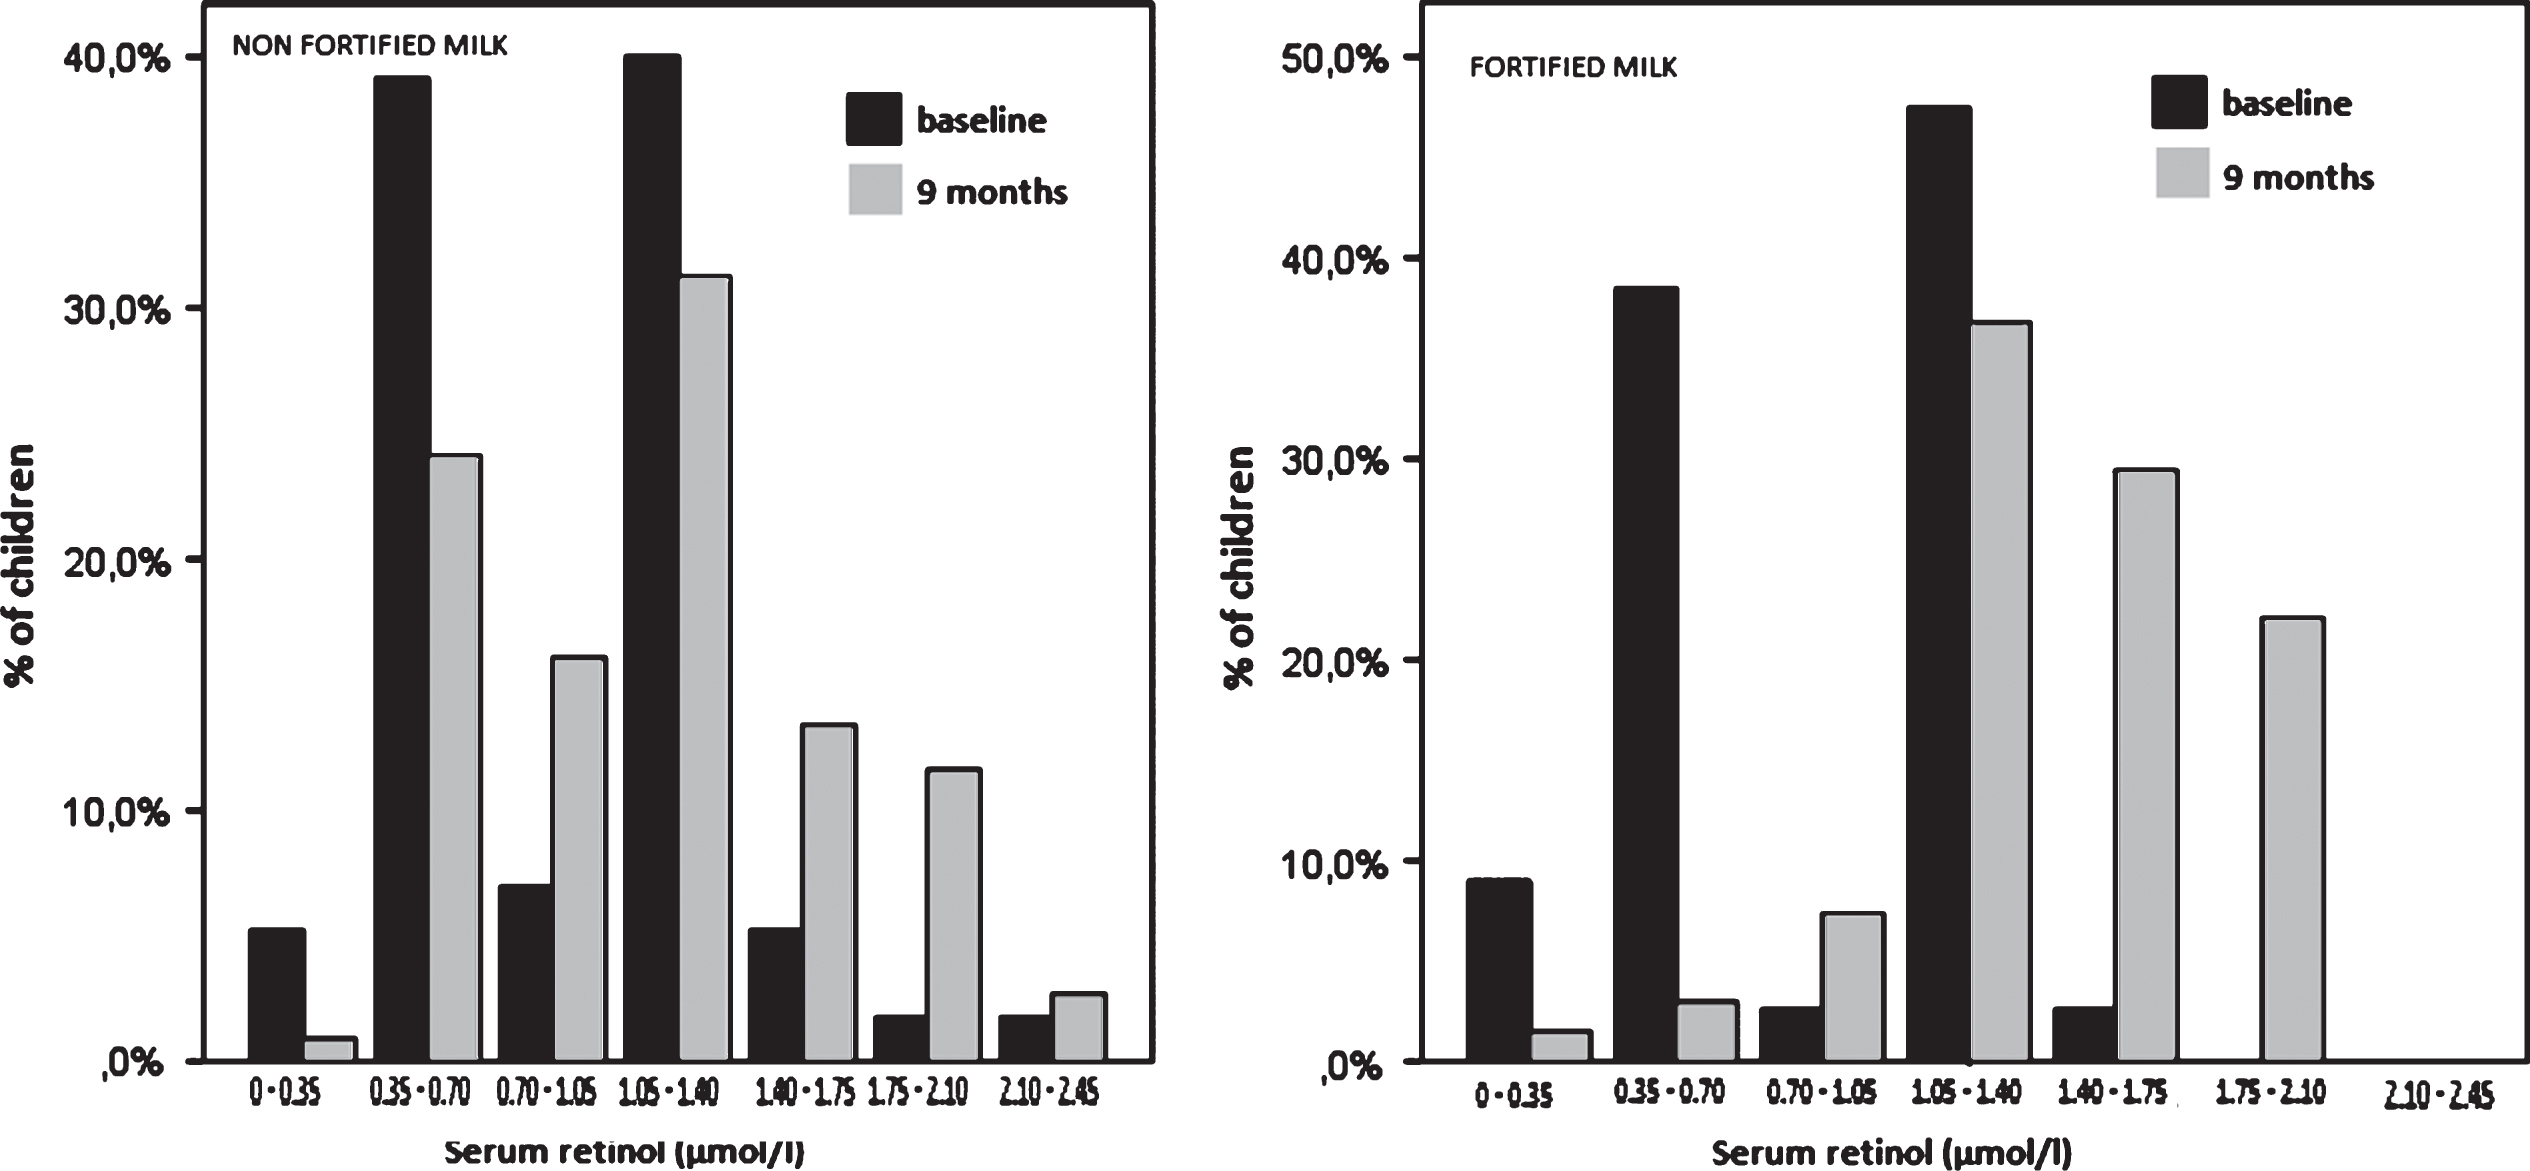 Distribution of serum retinol concentration at baseline and 9 months follow-up by milk’s group.